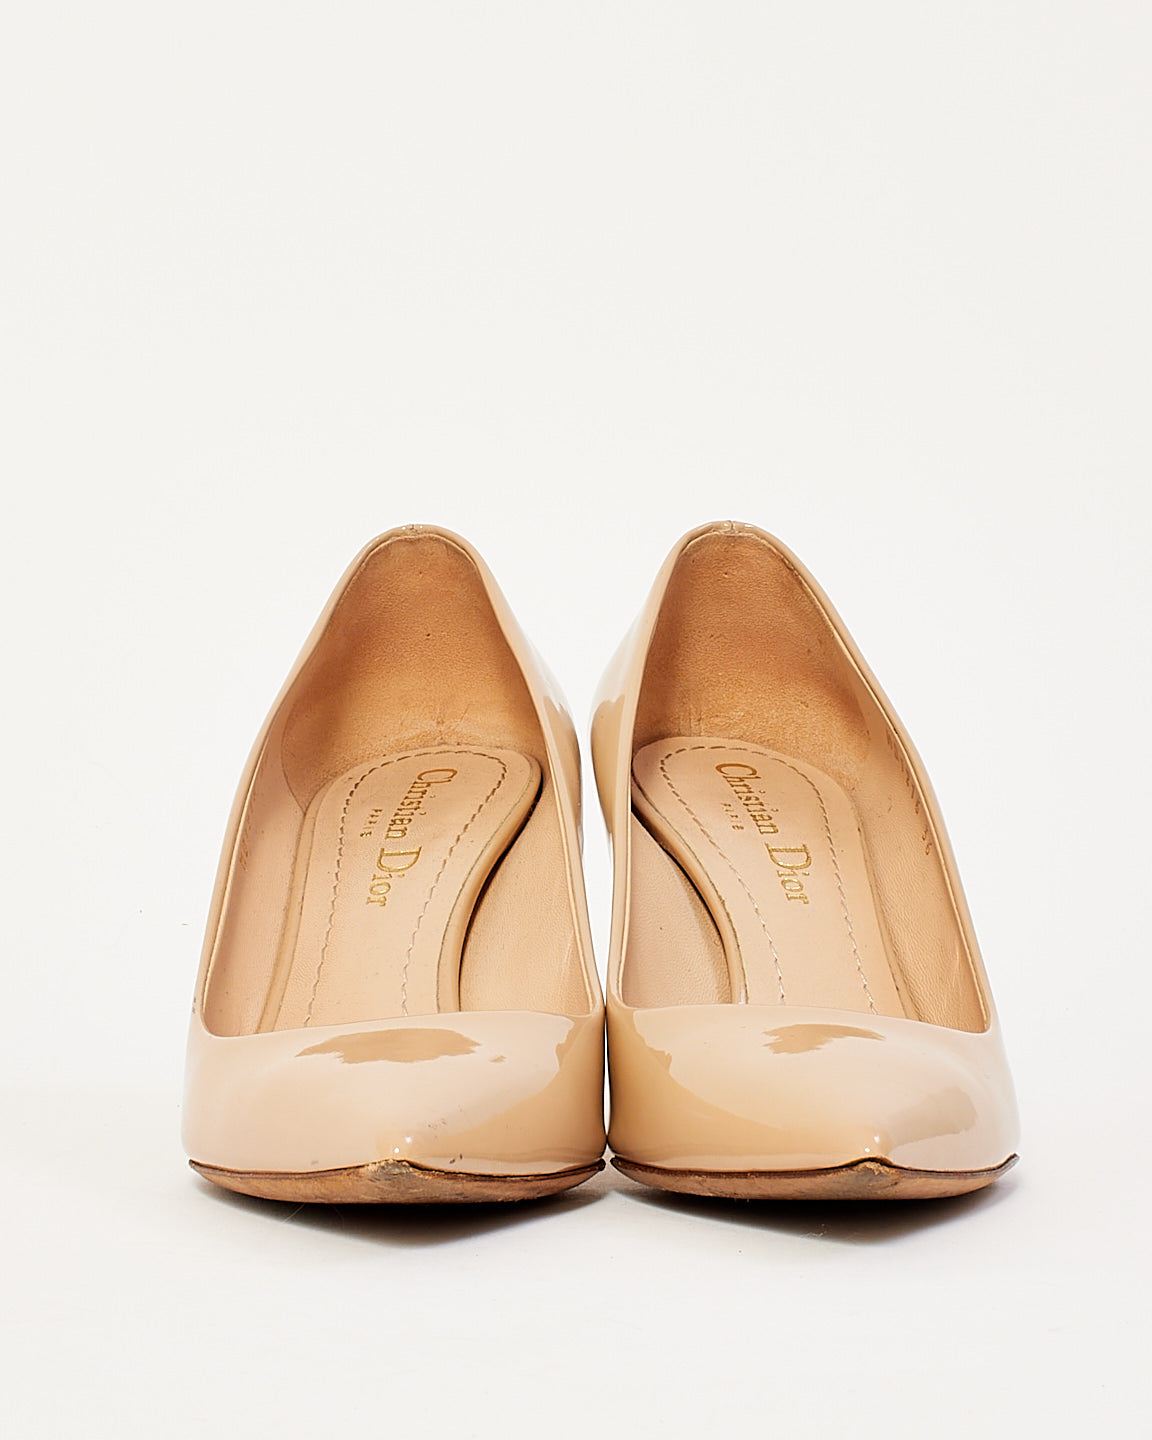 Dior Beige Patent Leather Point Toe Pumps - 36